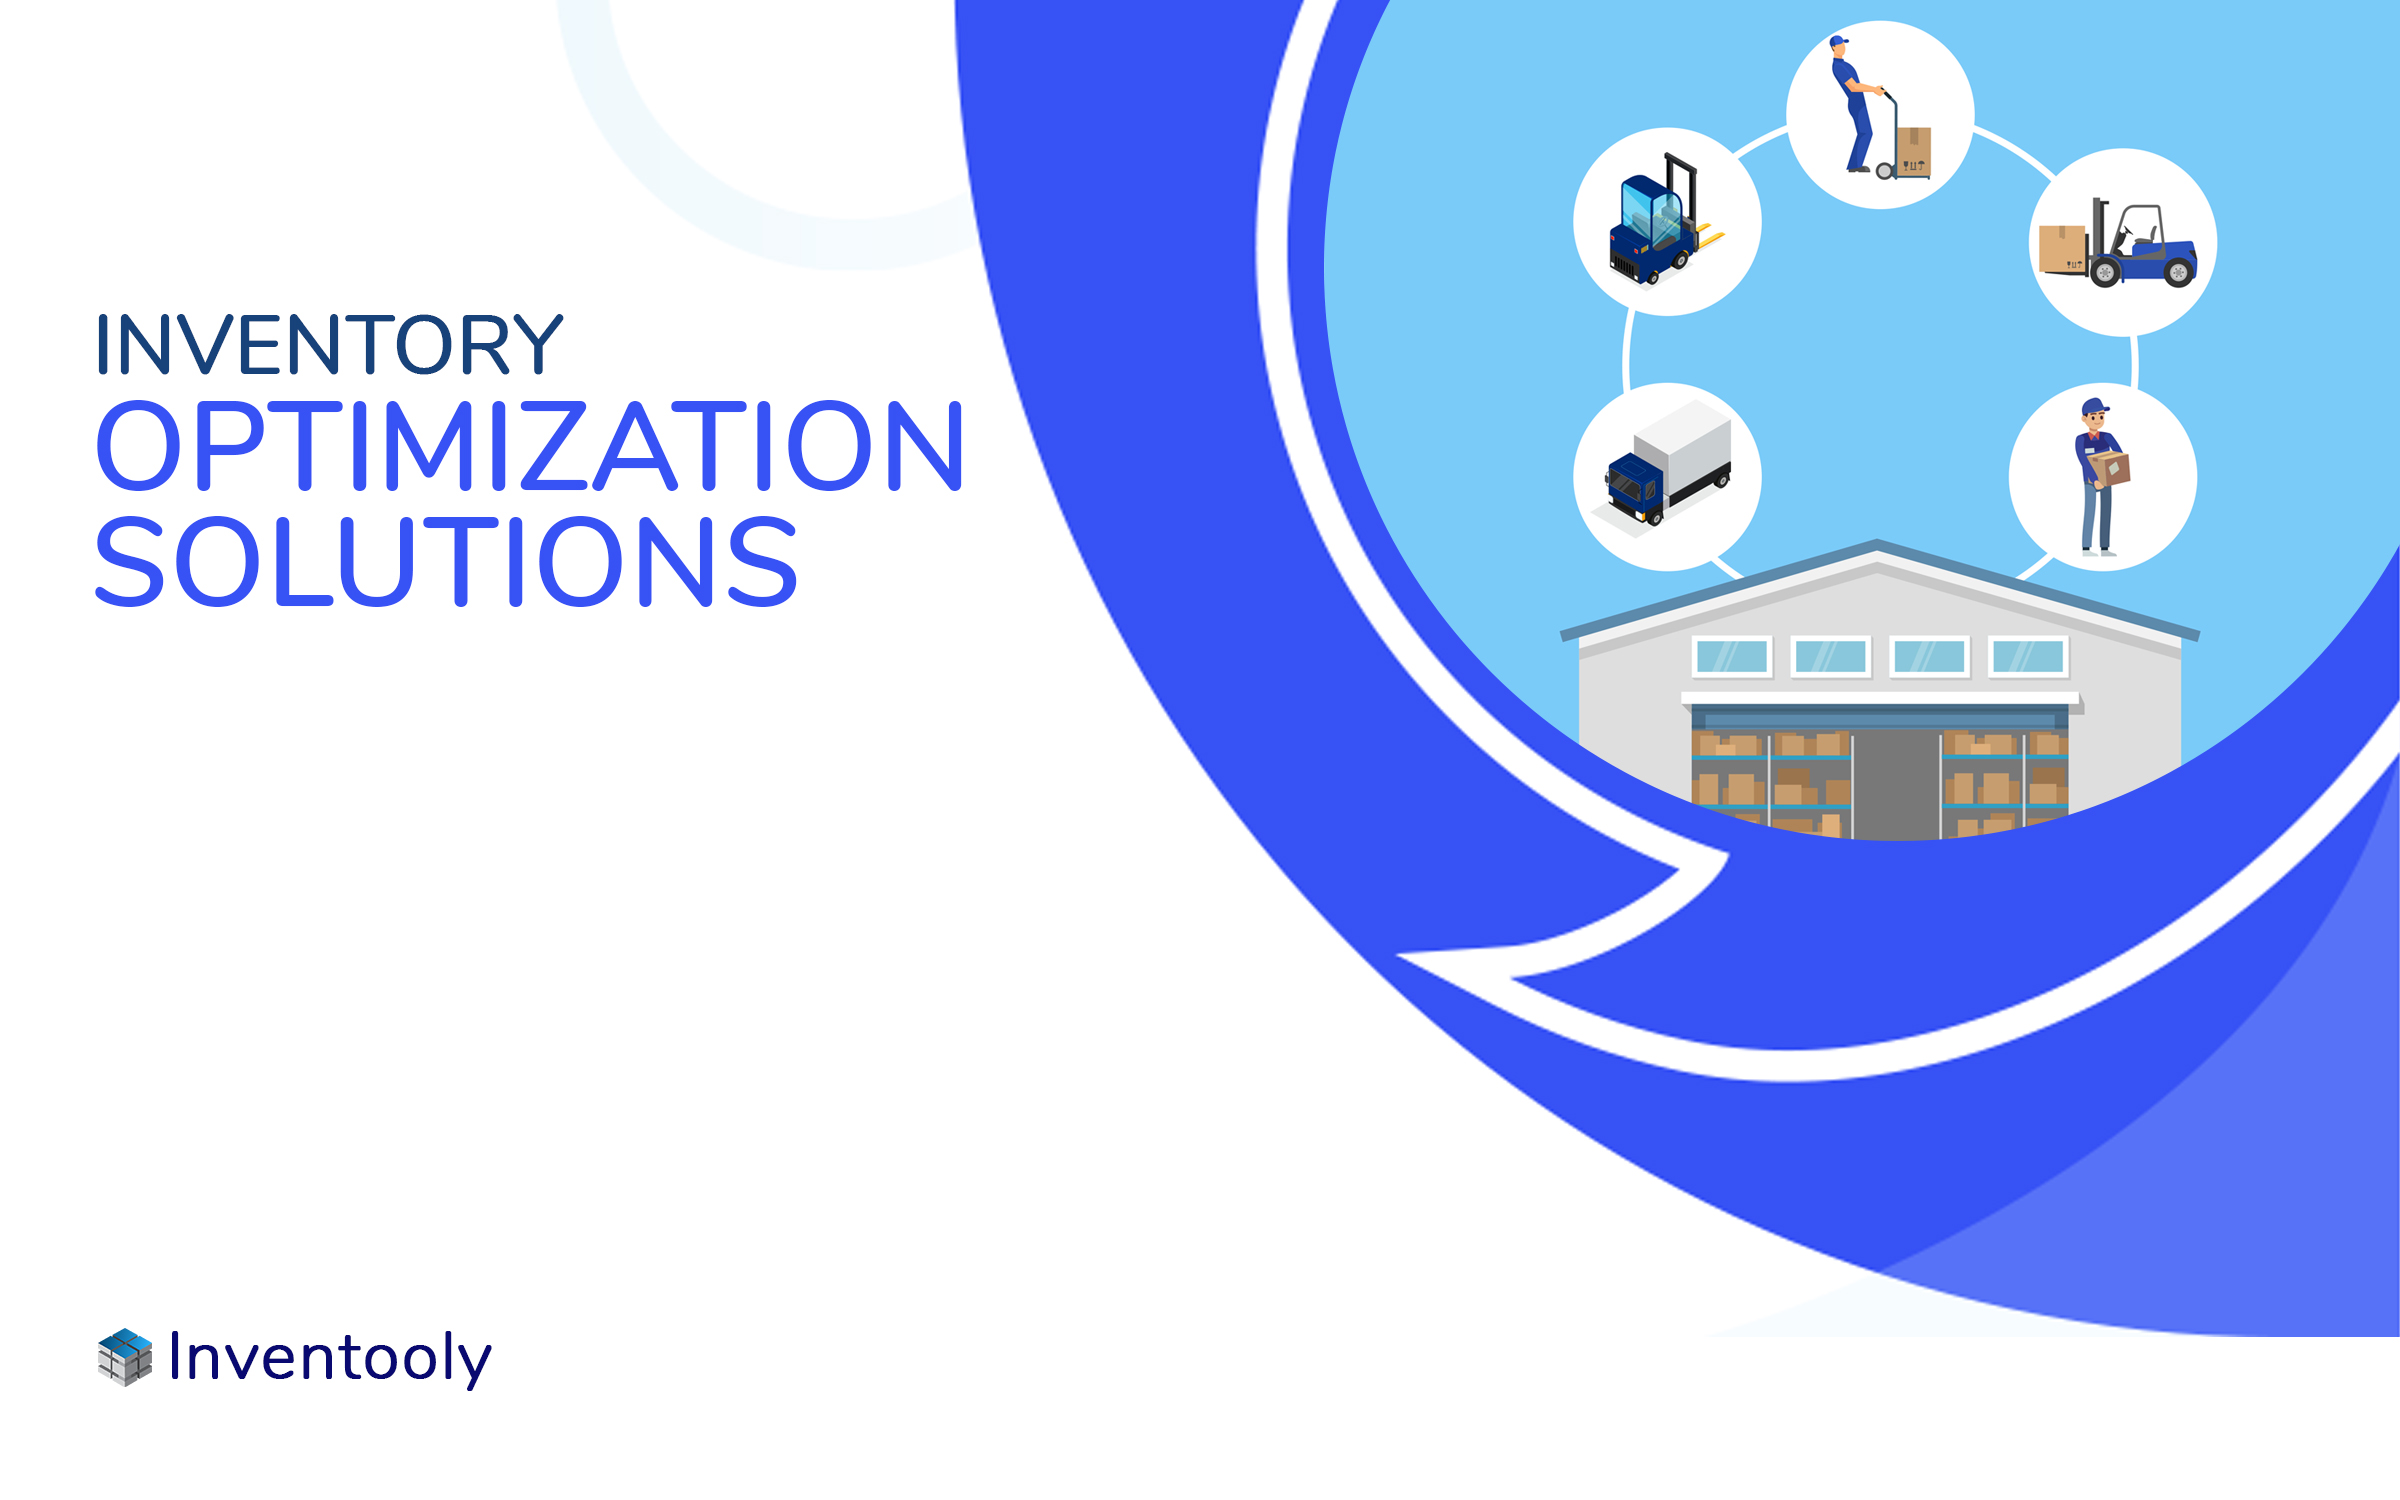 Inventory optimization solutions